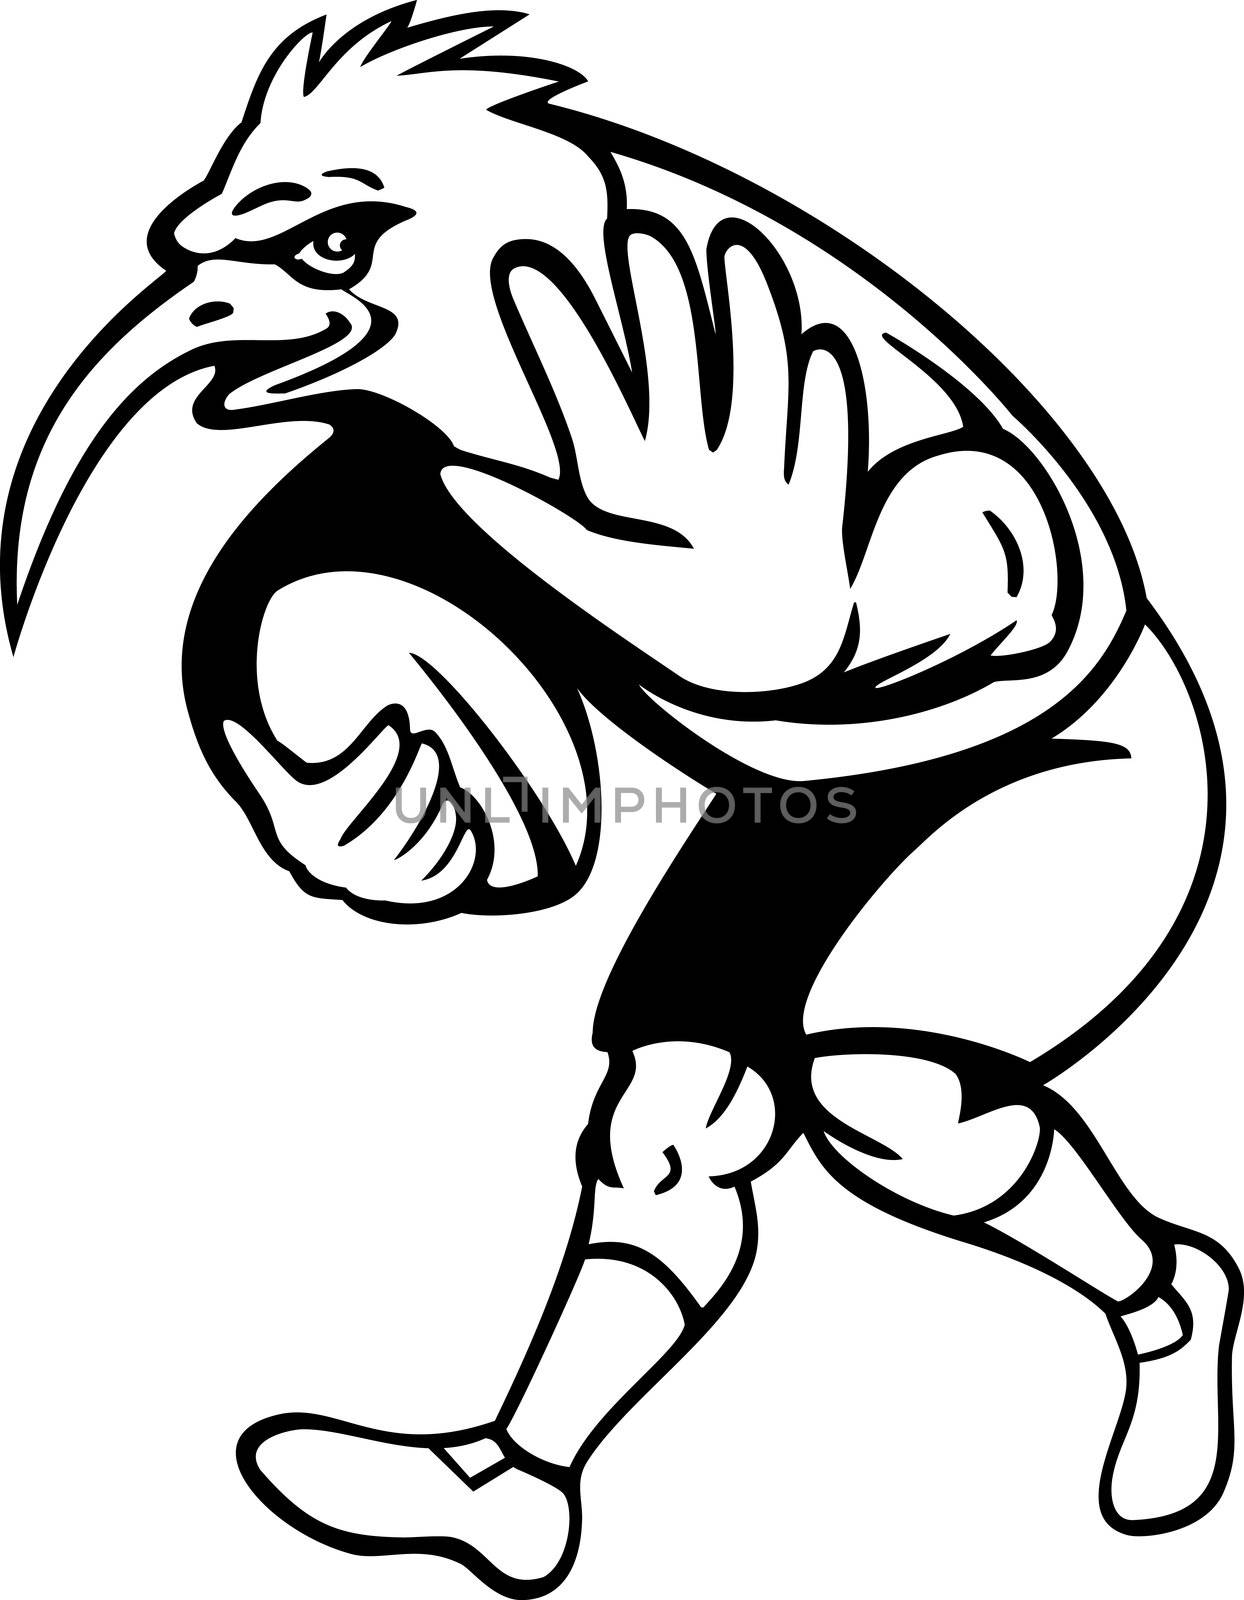 illustration of a cartoon Kiwi bird rugby player with ball fending off done in black and white isolated on white background.